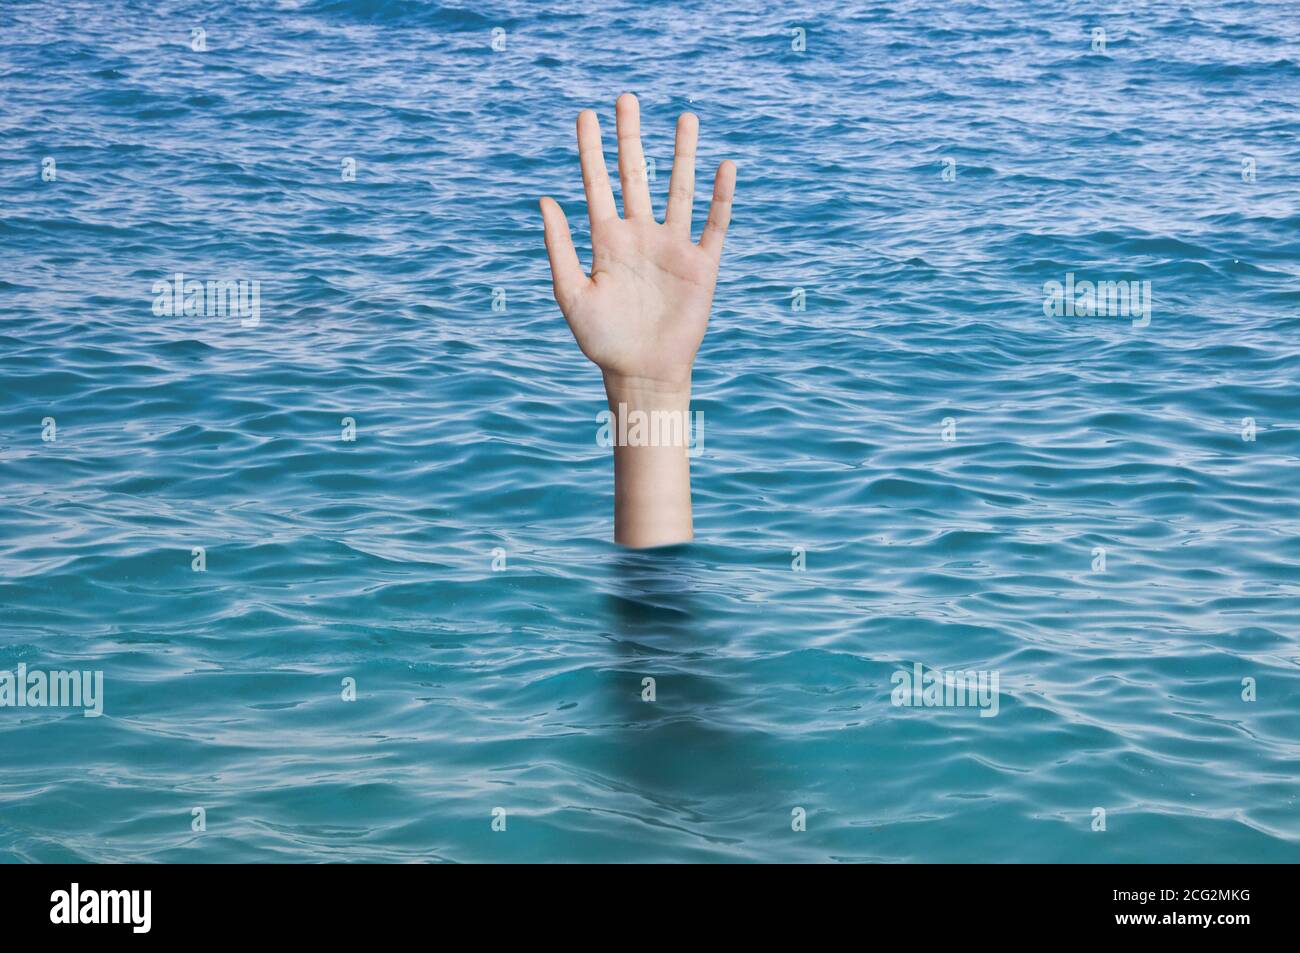 Sinking hand in ocean's water needing help. Drowning person Emergency, failure and help concept Stock Photo